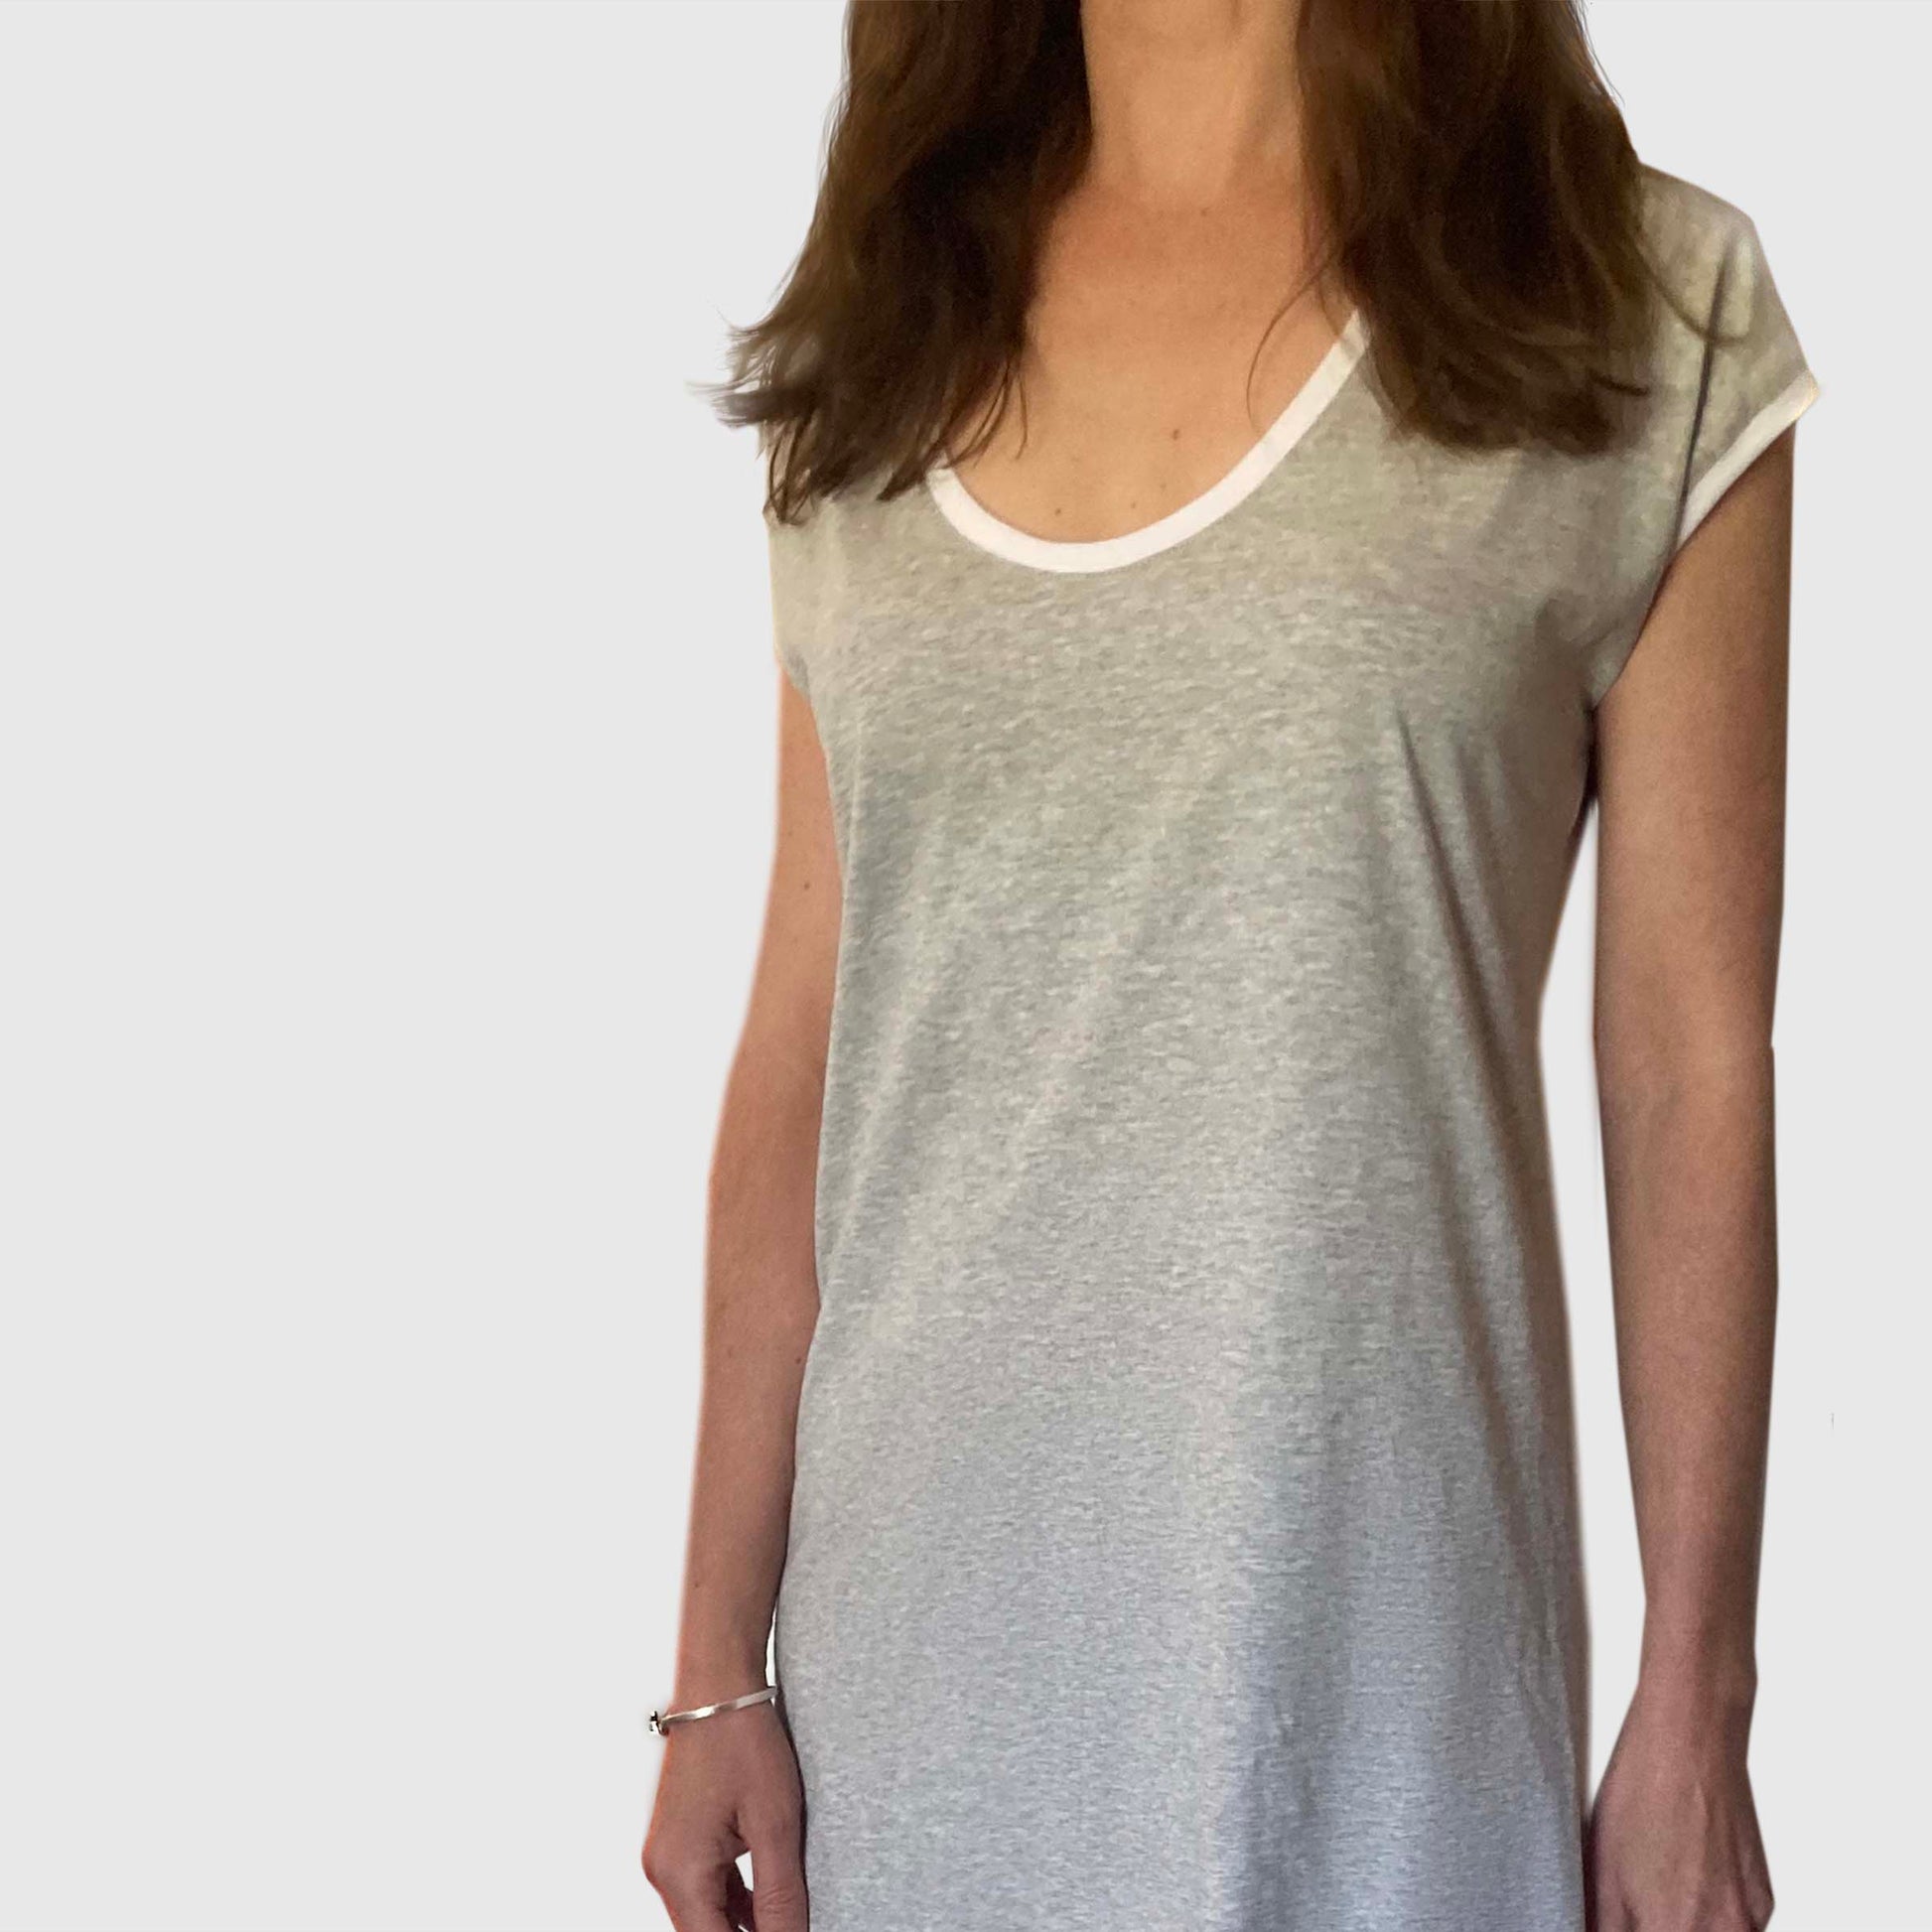 gLight grey marle organic cotton nightgown with round neck and white trim. Ethically made in Australia.